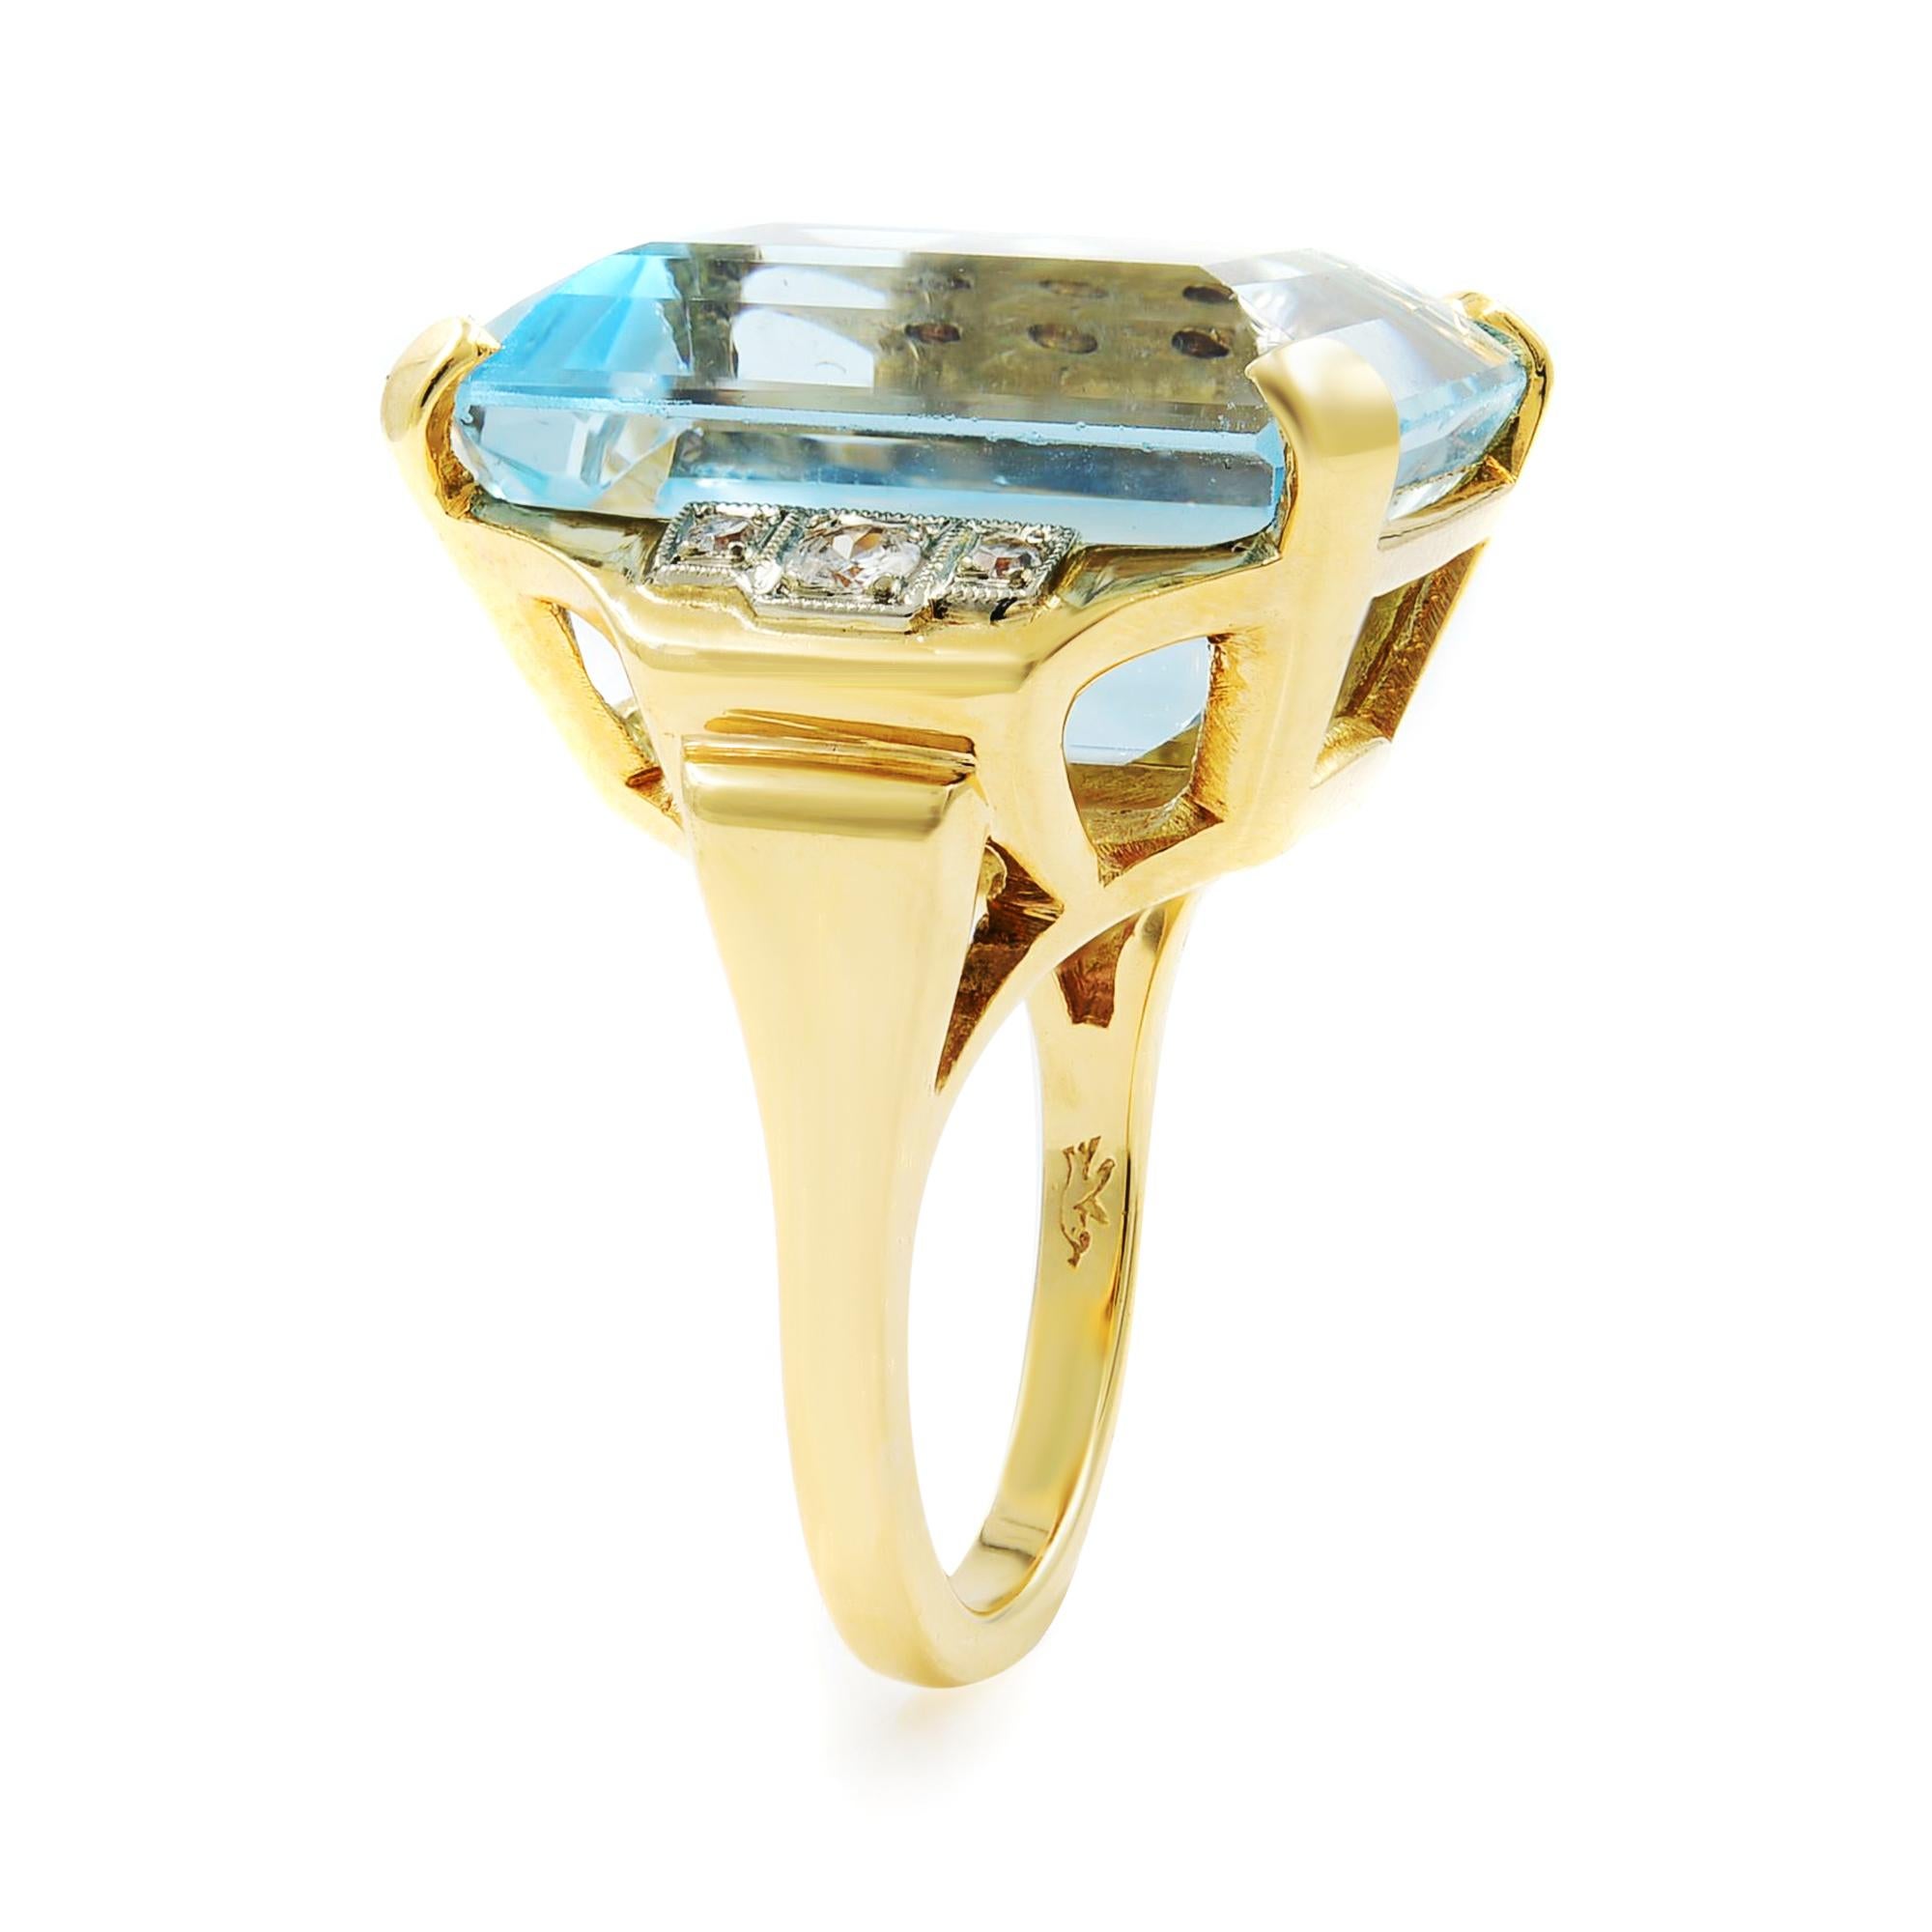 This is a beautiful large emerald cut aquamarine ring with diamonds on both sides. Total diamond weight is 0.25ct with G-H color, VS-SI clarity. Aquamarine weight: 23.76 carats.  Crafted in 14k yellow gold. Ring size: 6.5. Total weight: 15.83 grams.